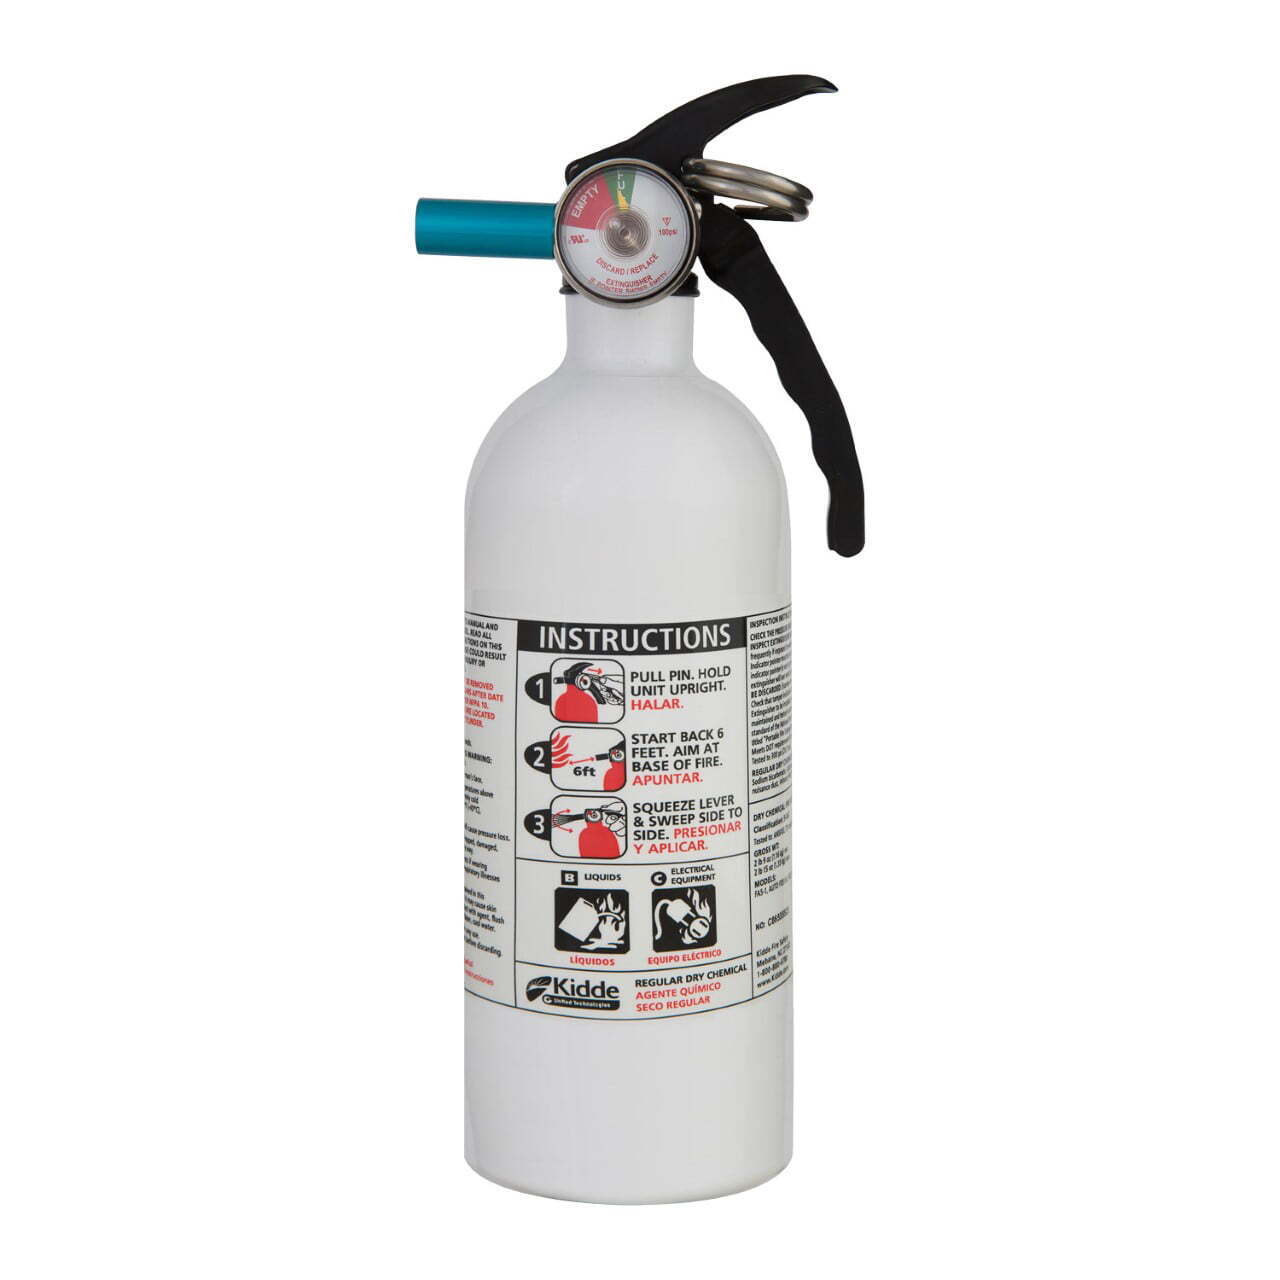 Kidde 5BC Fire Extinguisher Home Boat Office Safety Emergency -Fire Extinguisher